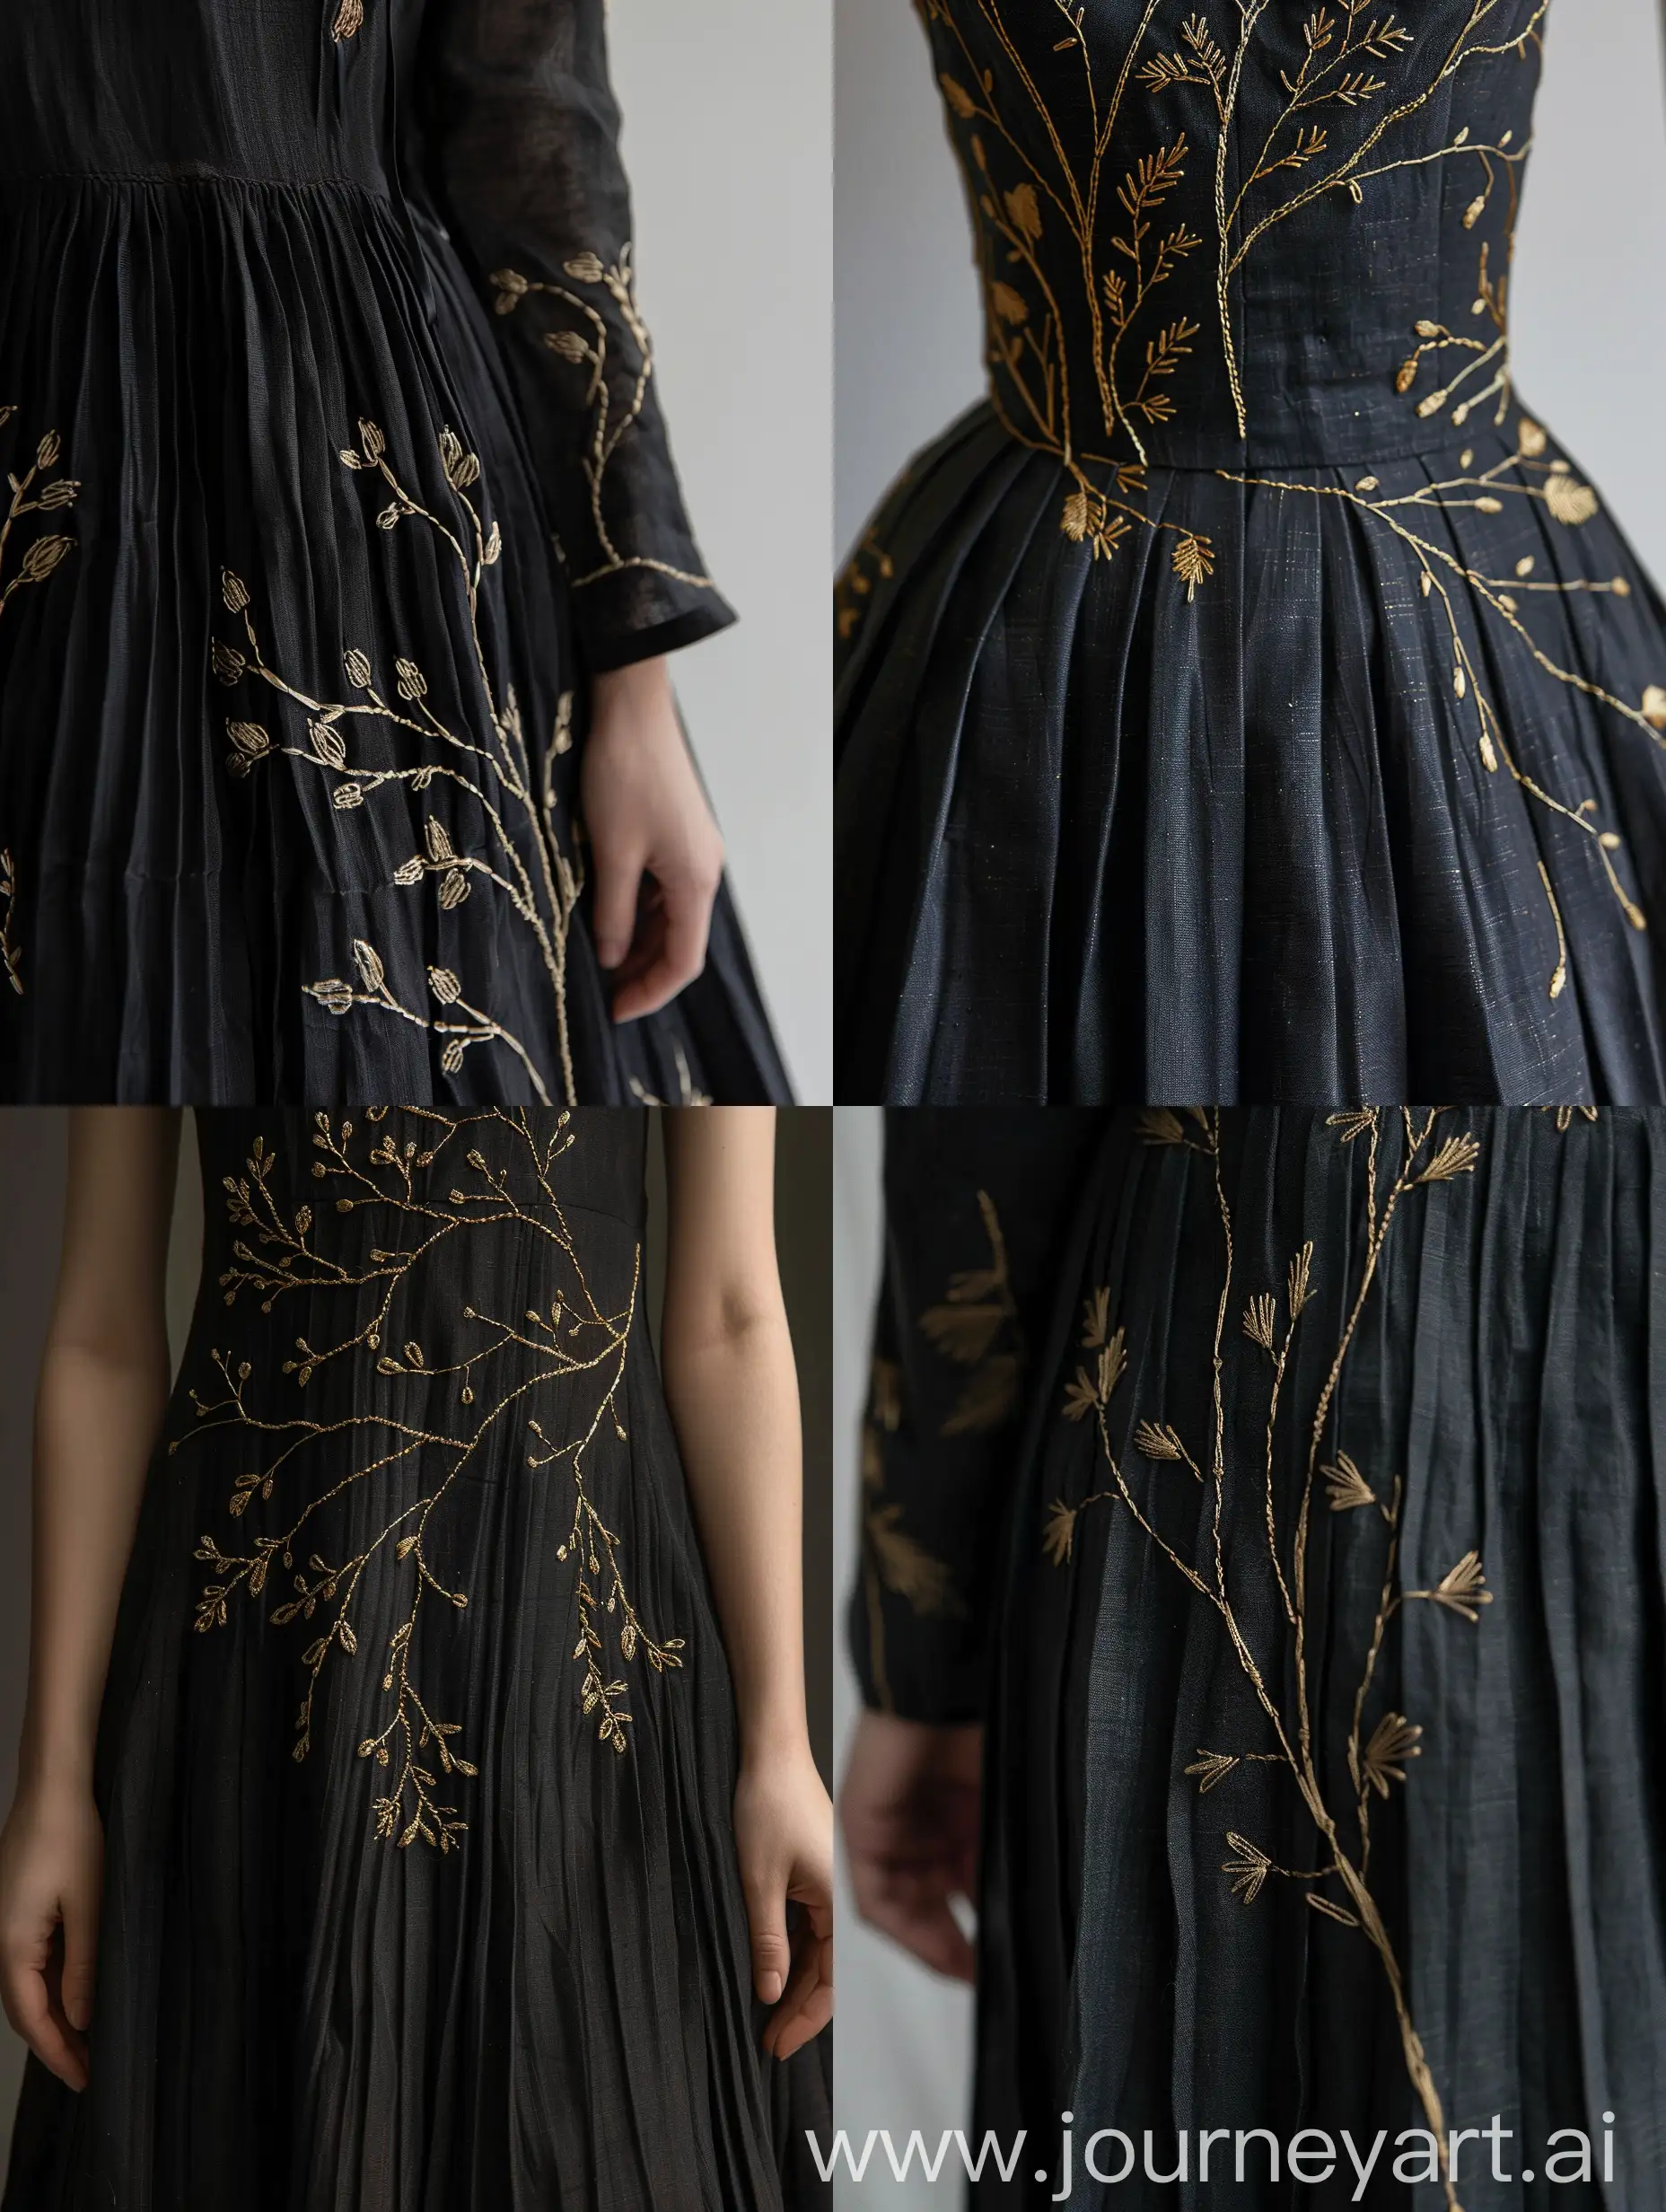 Dress, linen material, black color, with branch and leaf embroidery, golden embroidery color, pleated dress